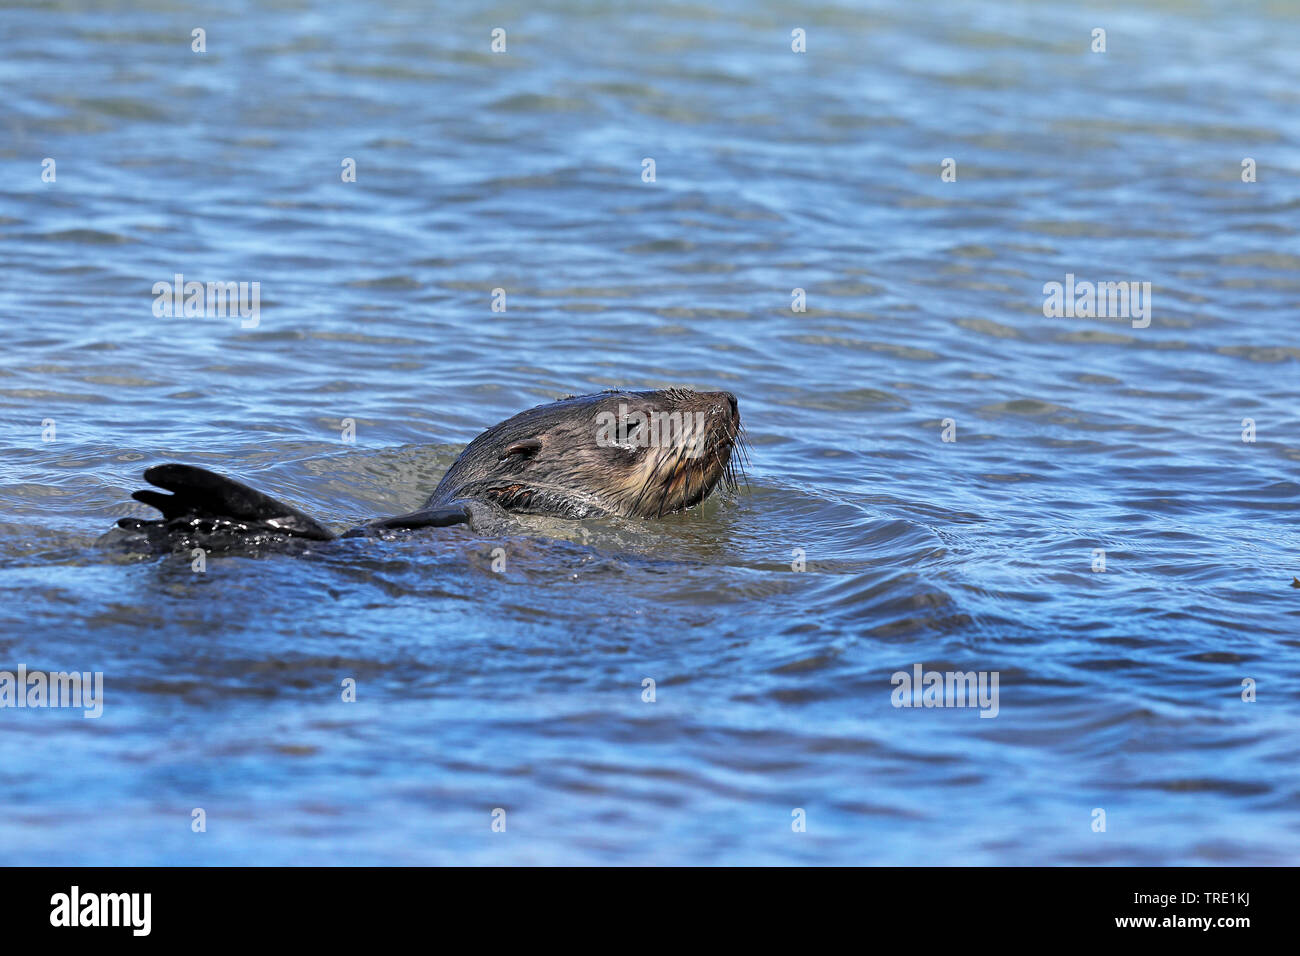 African clawless otter (Aonyx capensis), swimming in the sea, South Africa, Western Cape, Cape of Good Hope National Park Stock Photo